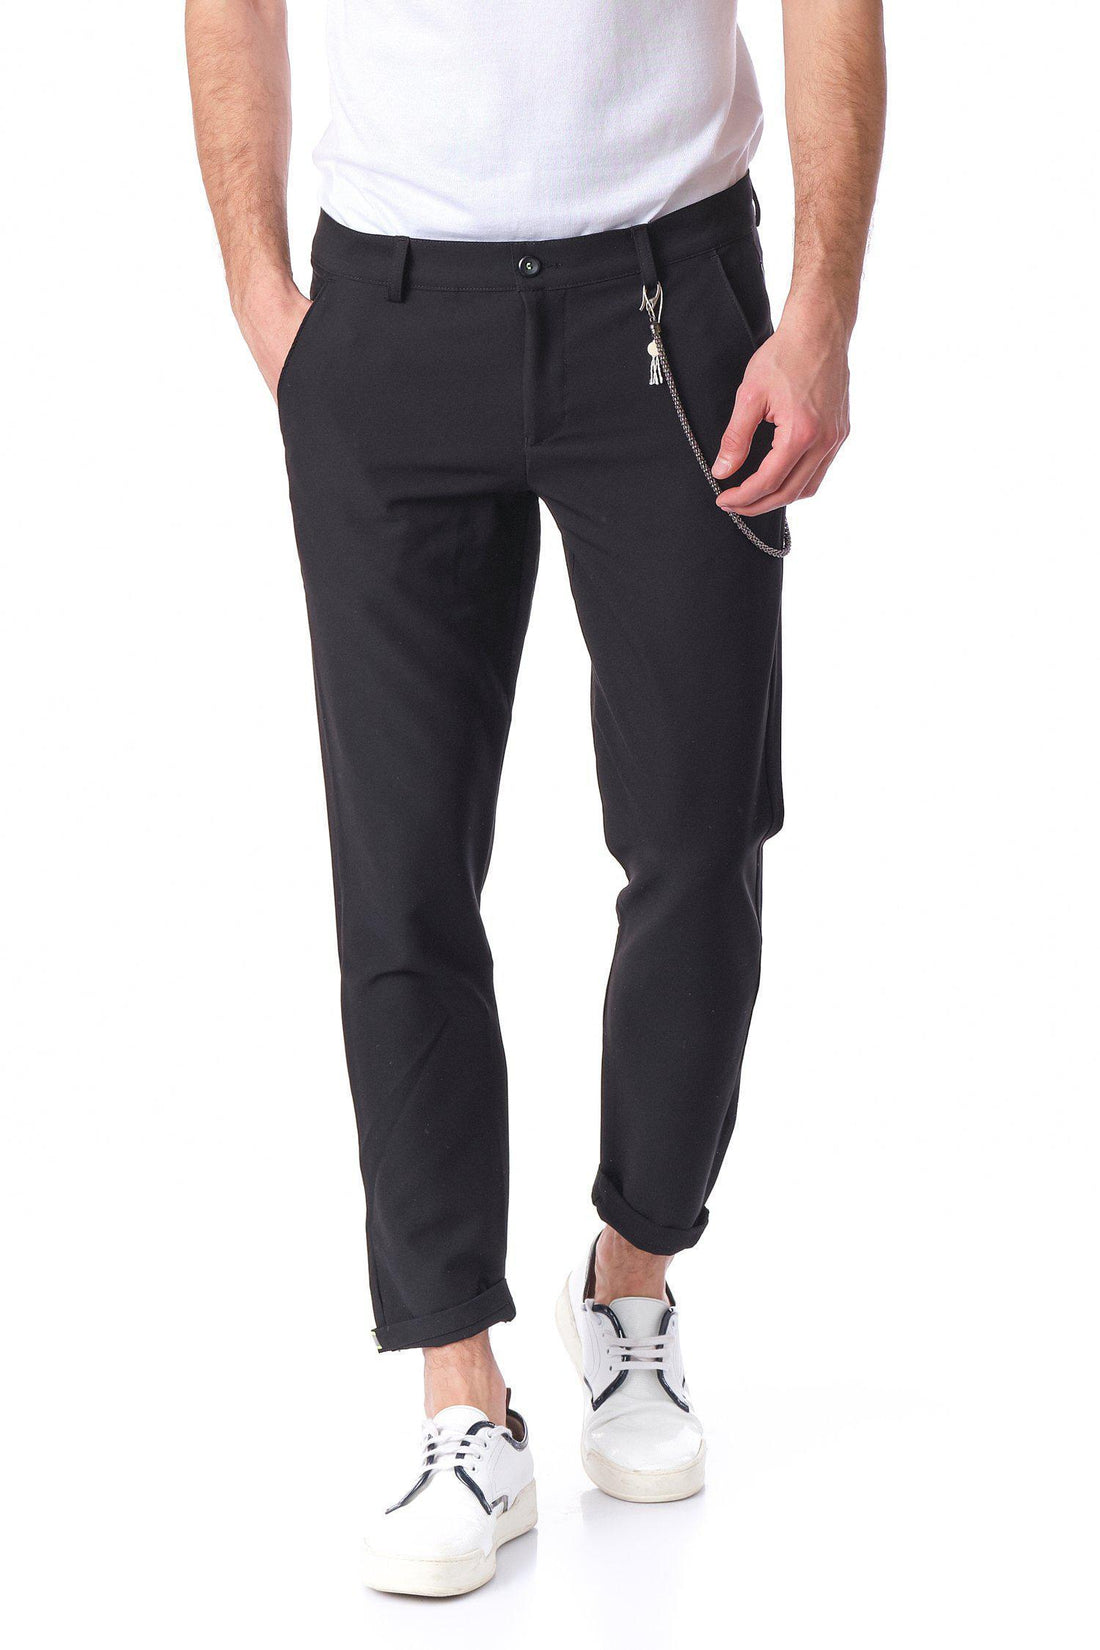 French Quarter Casual Trouser - Black - Ron Tomson